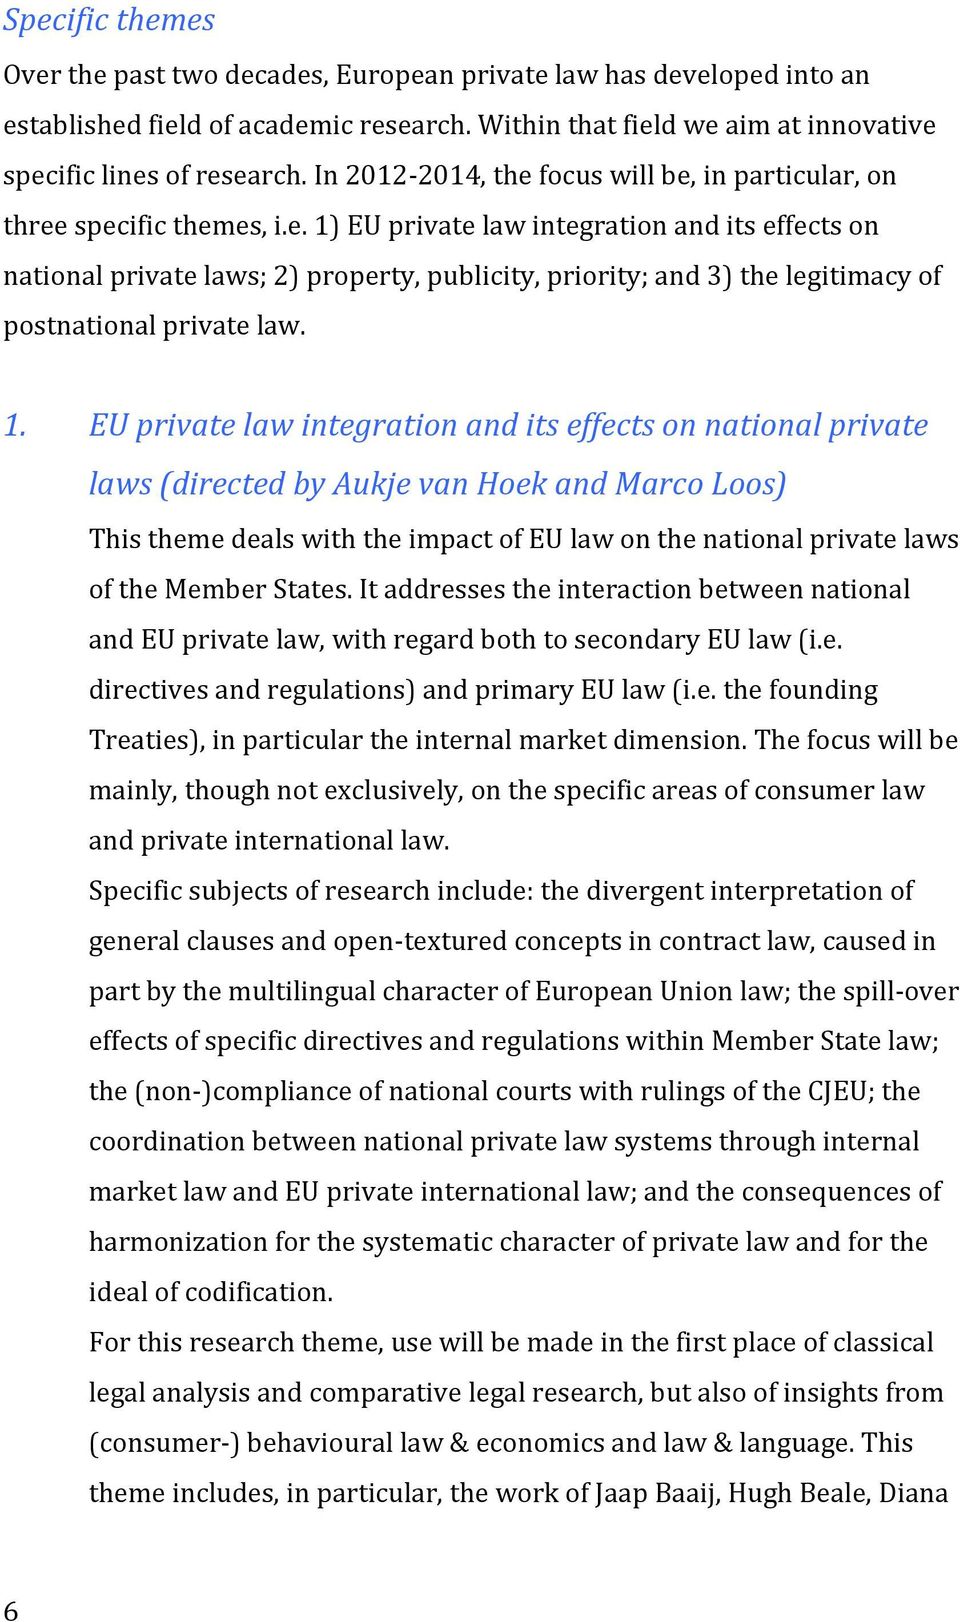 1. EU private law integration and its effects on national private laws (directed by Aukje van Hoek and Marco Loos) This theme deals with the impact of EU law on the national private laws of the